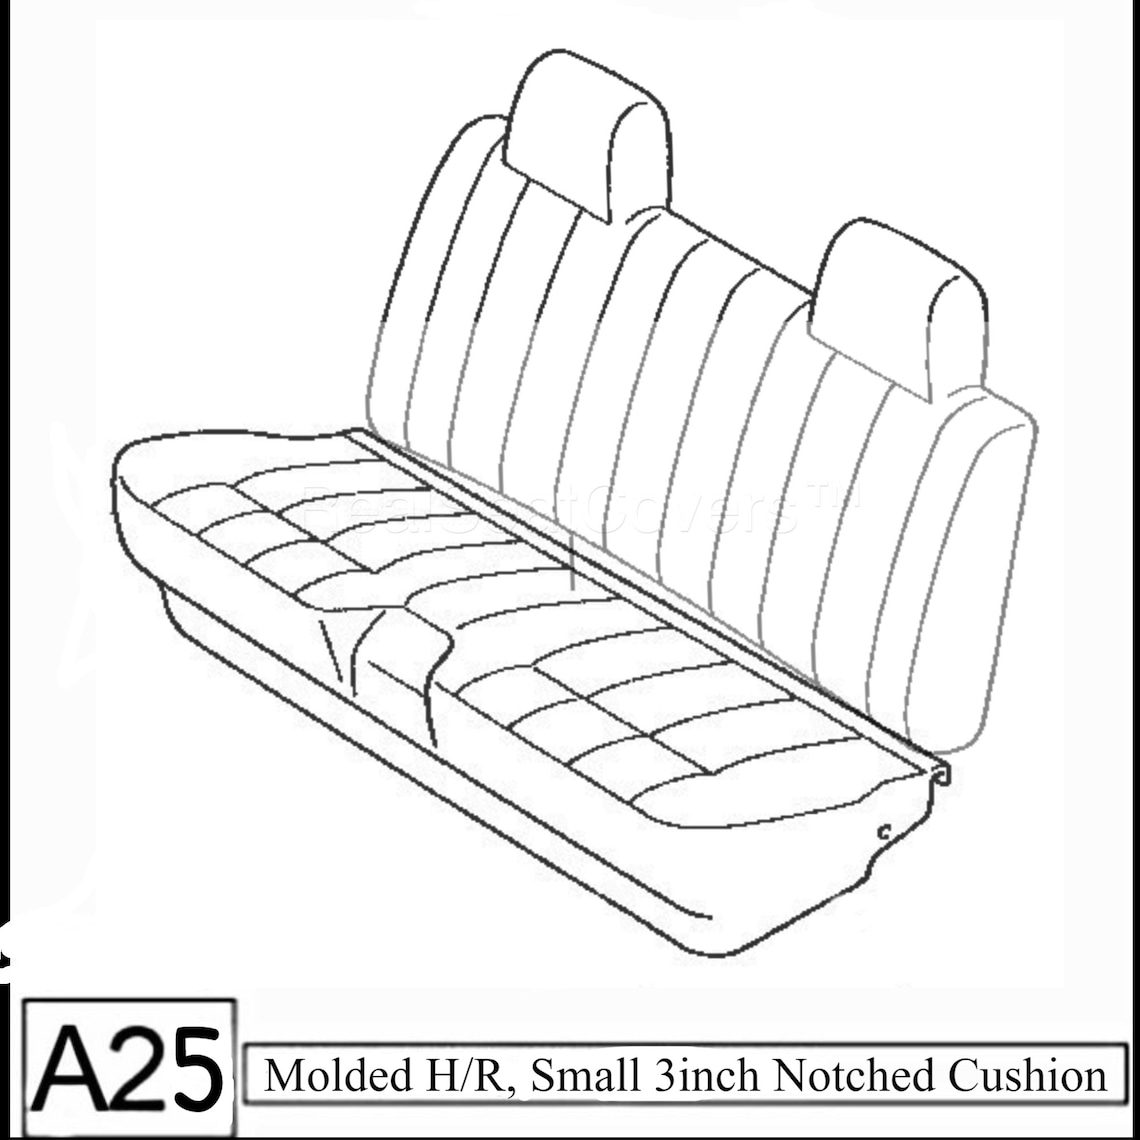 Seat Cover for Toyota Pickup 1984 - 1989 Front Solid Bench A25 Molded Headrest Small Notched Cushion (Black) - image 2 of 4